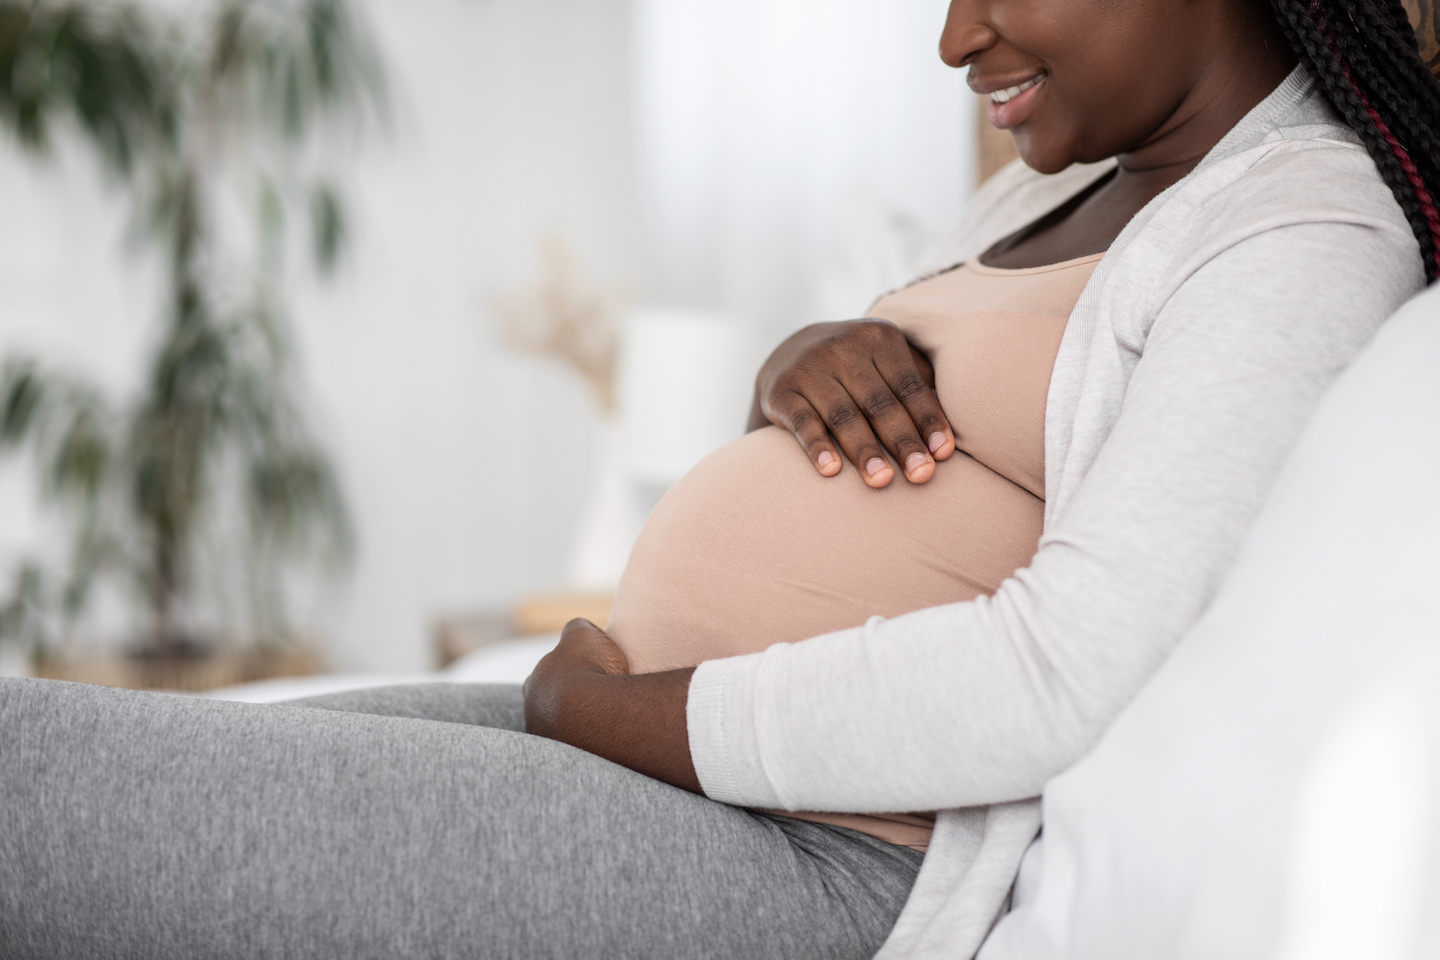 The Benefits of Getting the Covid Vaccine as a Pregnant Black Woman